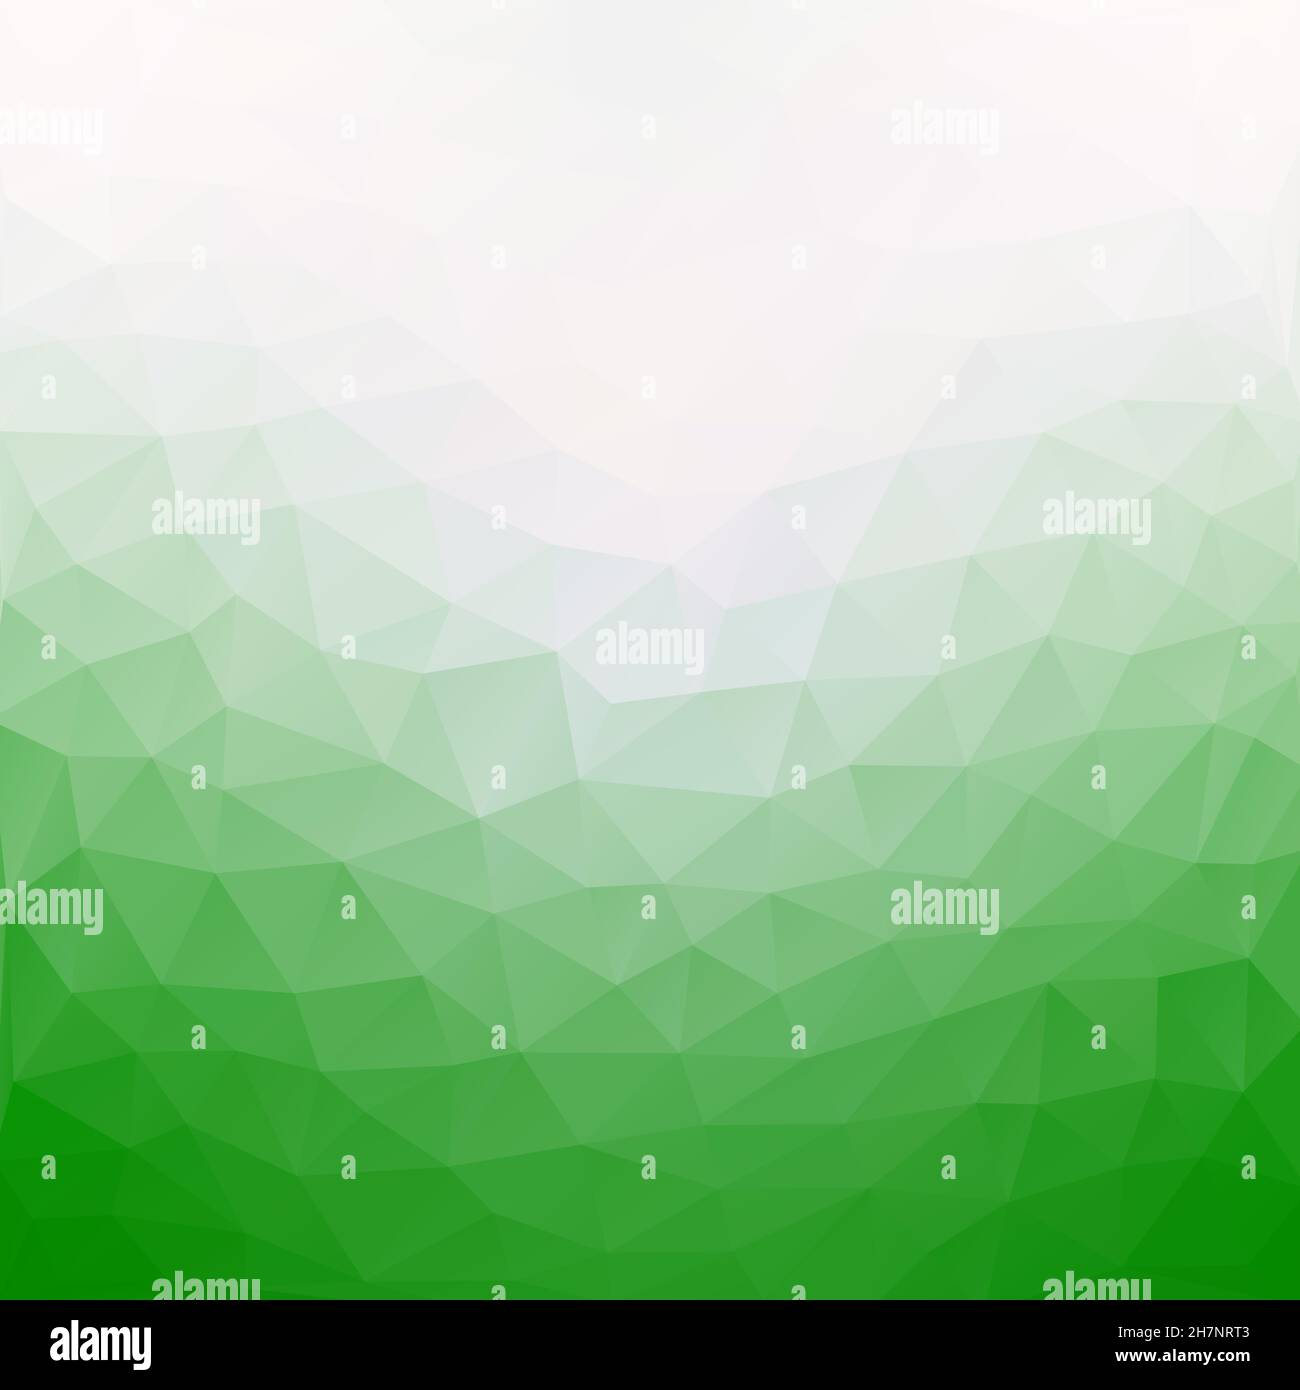 Geometric green color texture background Stock Vector